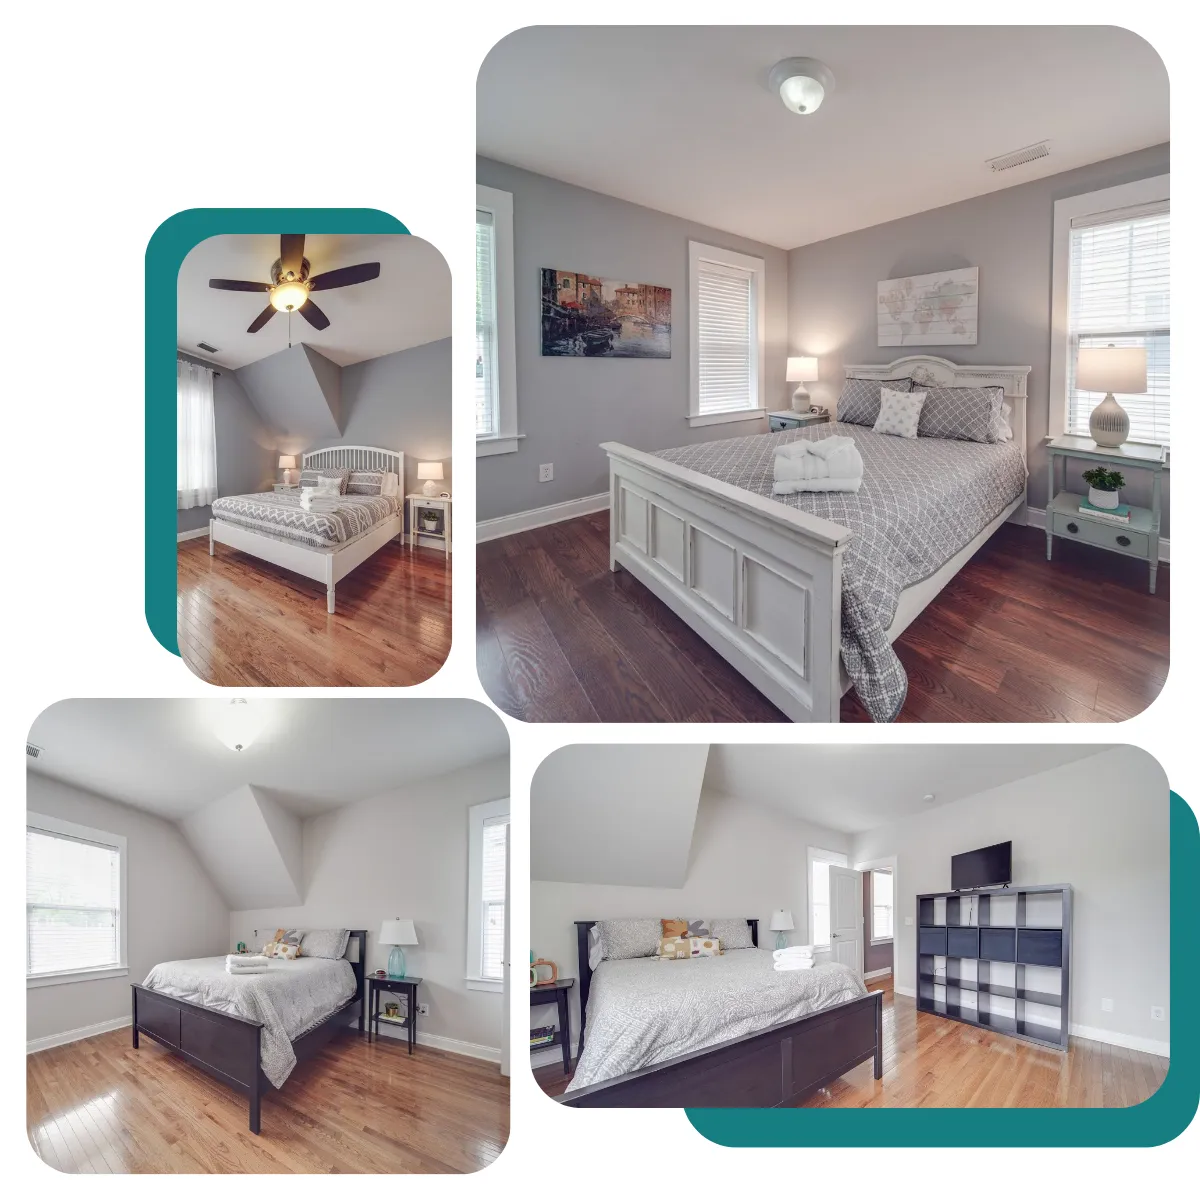 Feel at home at Wesley Heights Stay with a cozy guest room and bathroom downstairs, and an open kitchen, dining, and living space upstairs, along with a convenient half bath.